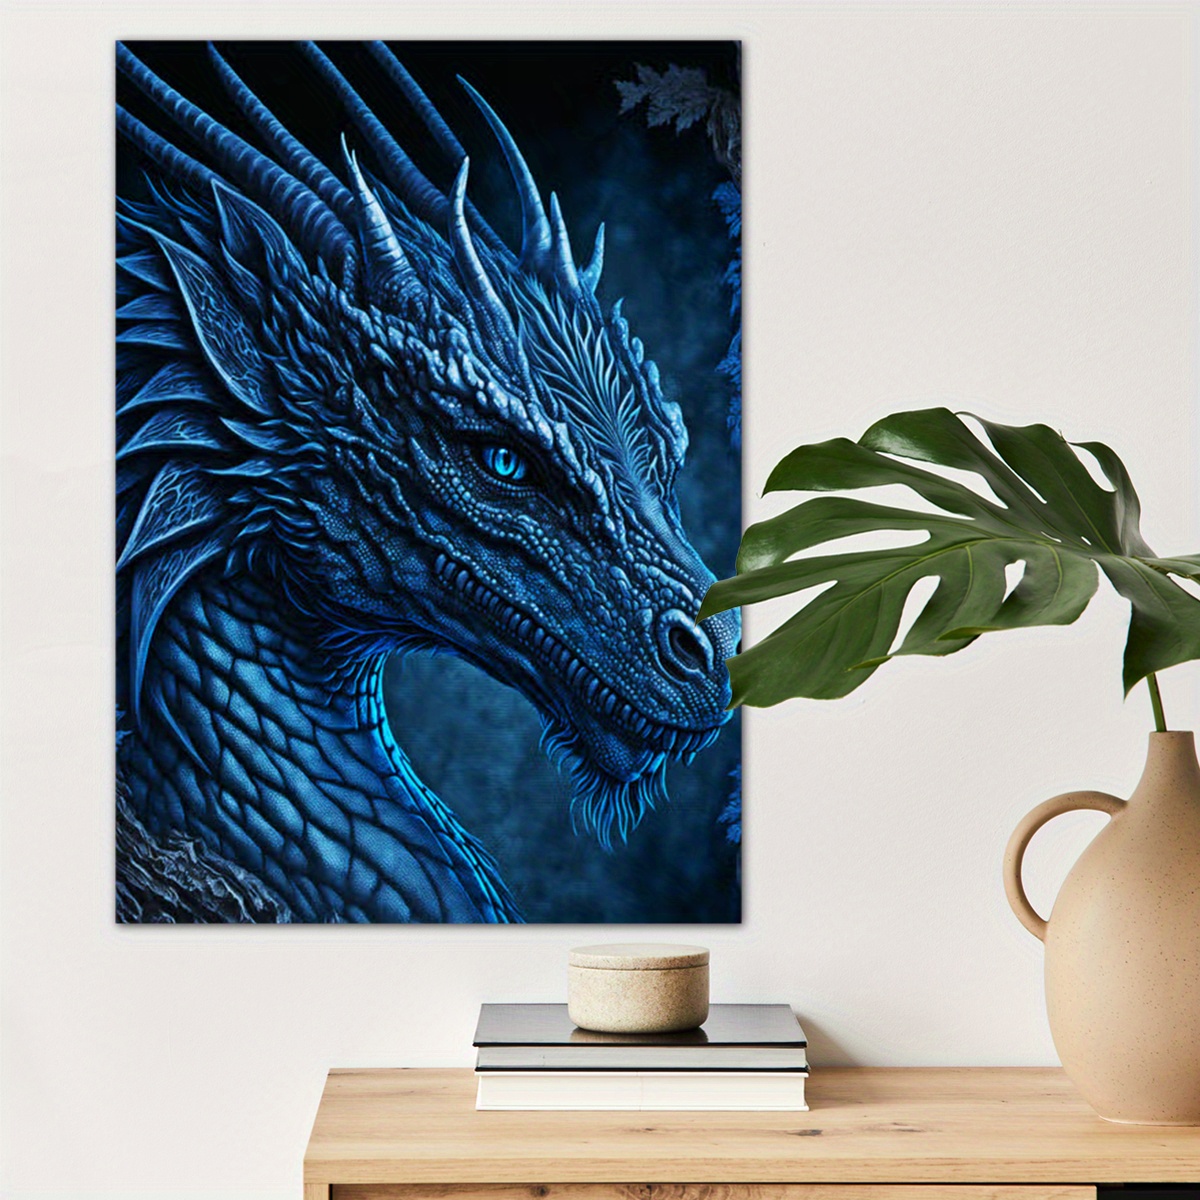 

1pc Blue Dragon Poster Canvas Wall Art For Home Decor, Fantasy Poster Wall Decor High Quality Canvas Prints For Living Room Bedroom Kitchen Office Cafe Decor, Perfect Gift And Decoration